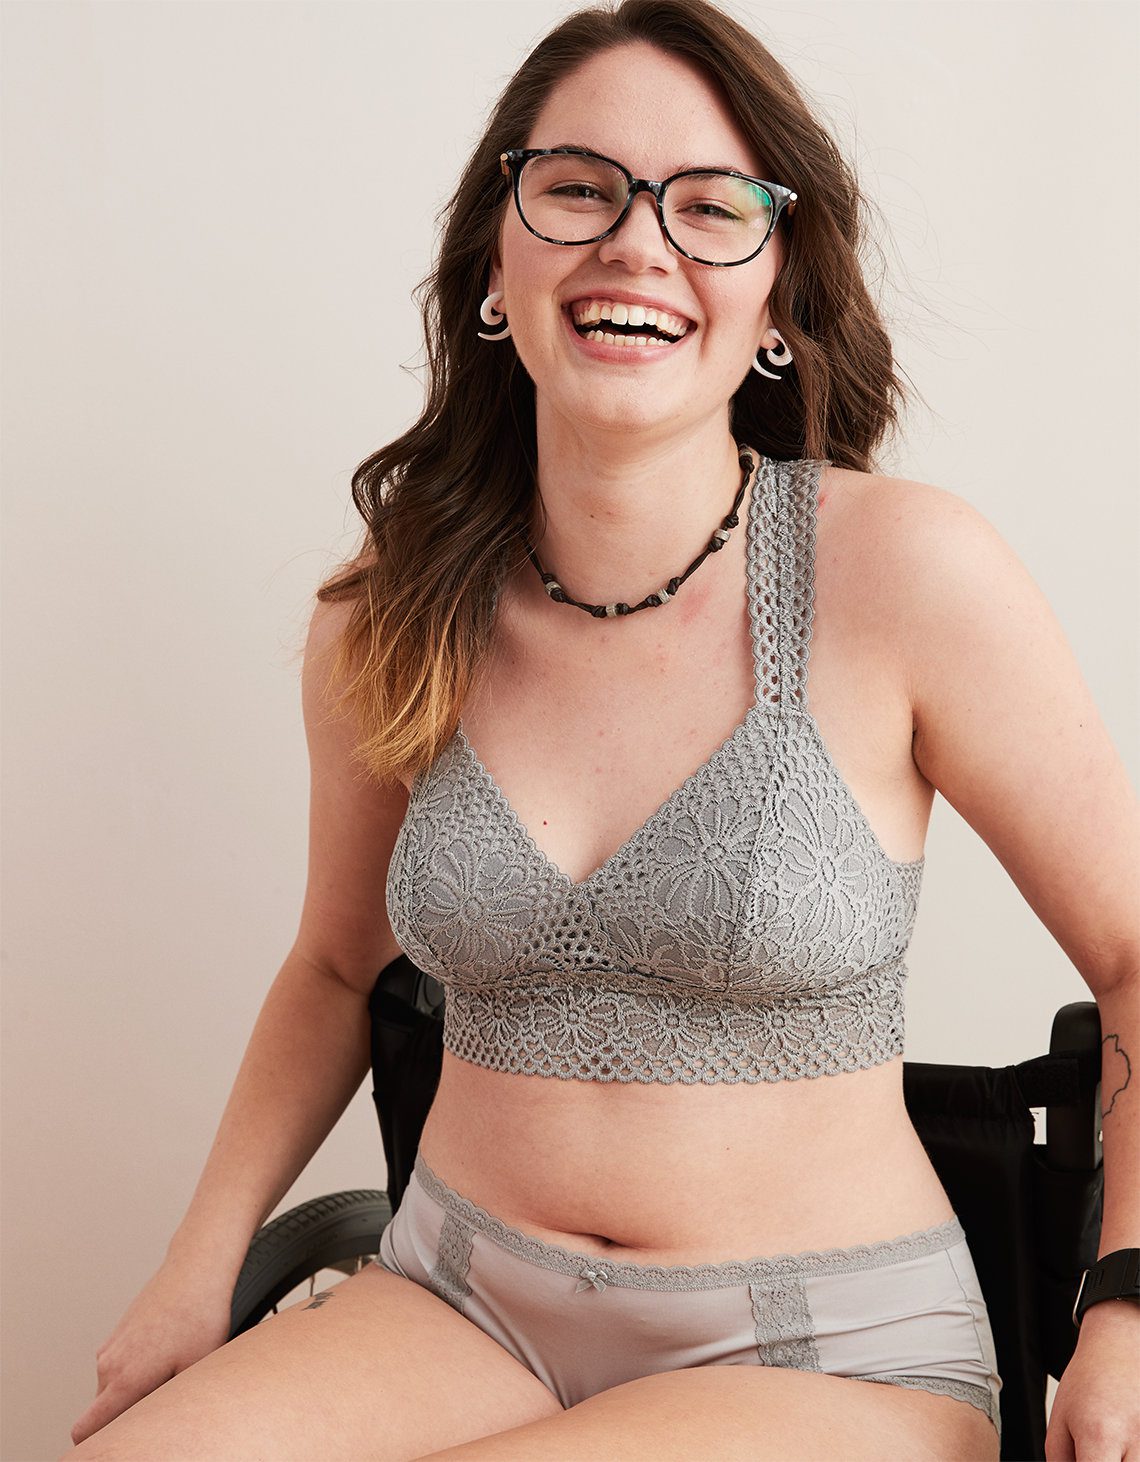 Aerie's new collection, how to sell confidence, and who the “Real